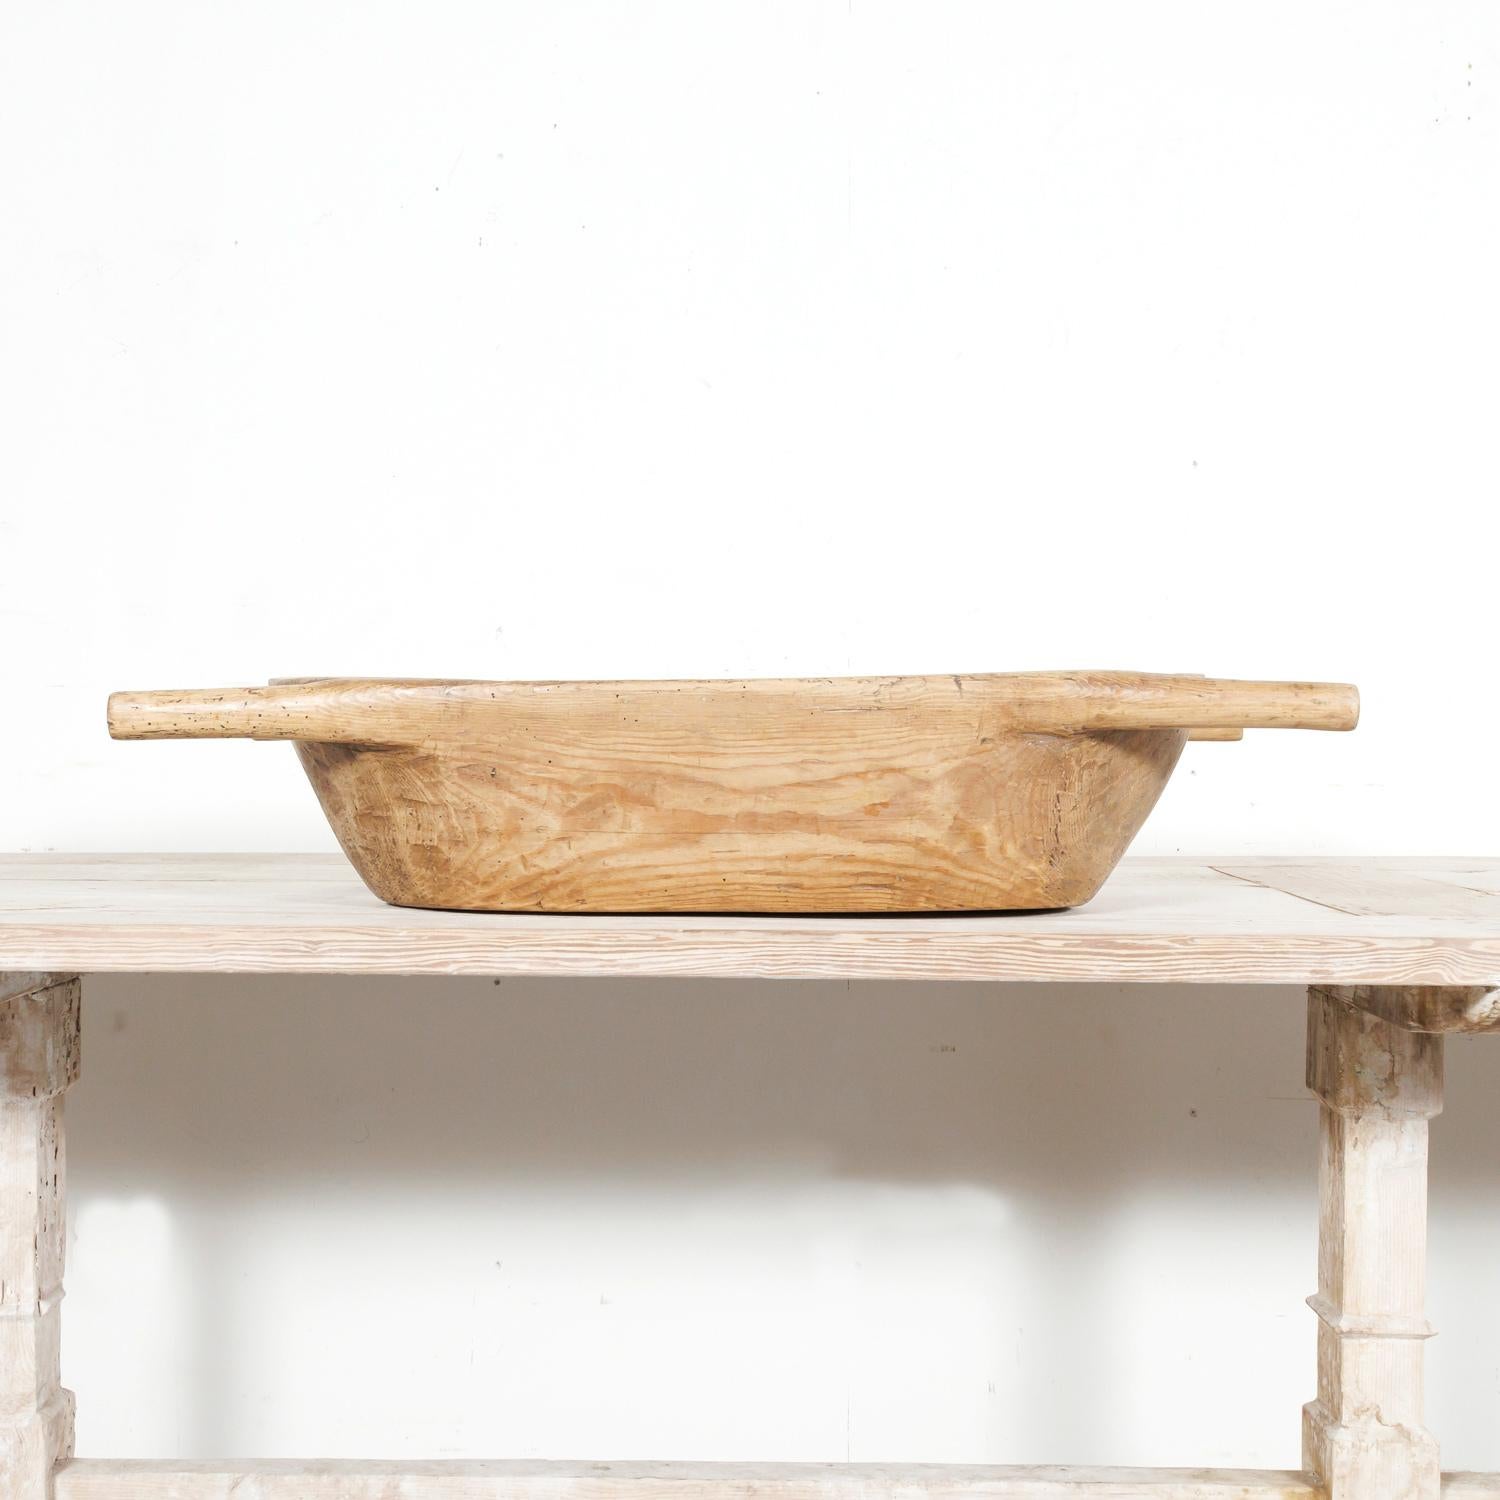 Late 19th Century Large 19th Century French Wooden Grain or Dough Bowl with Handles For Sale